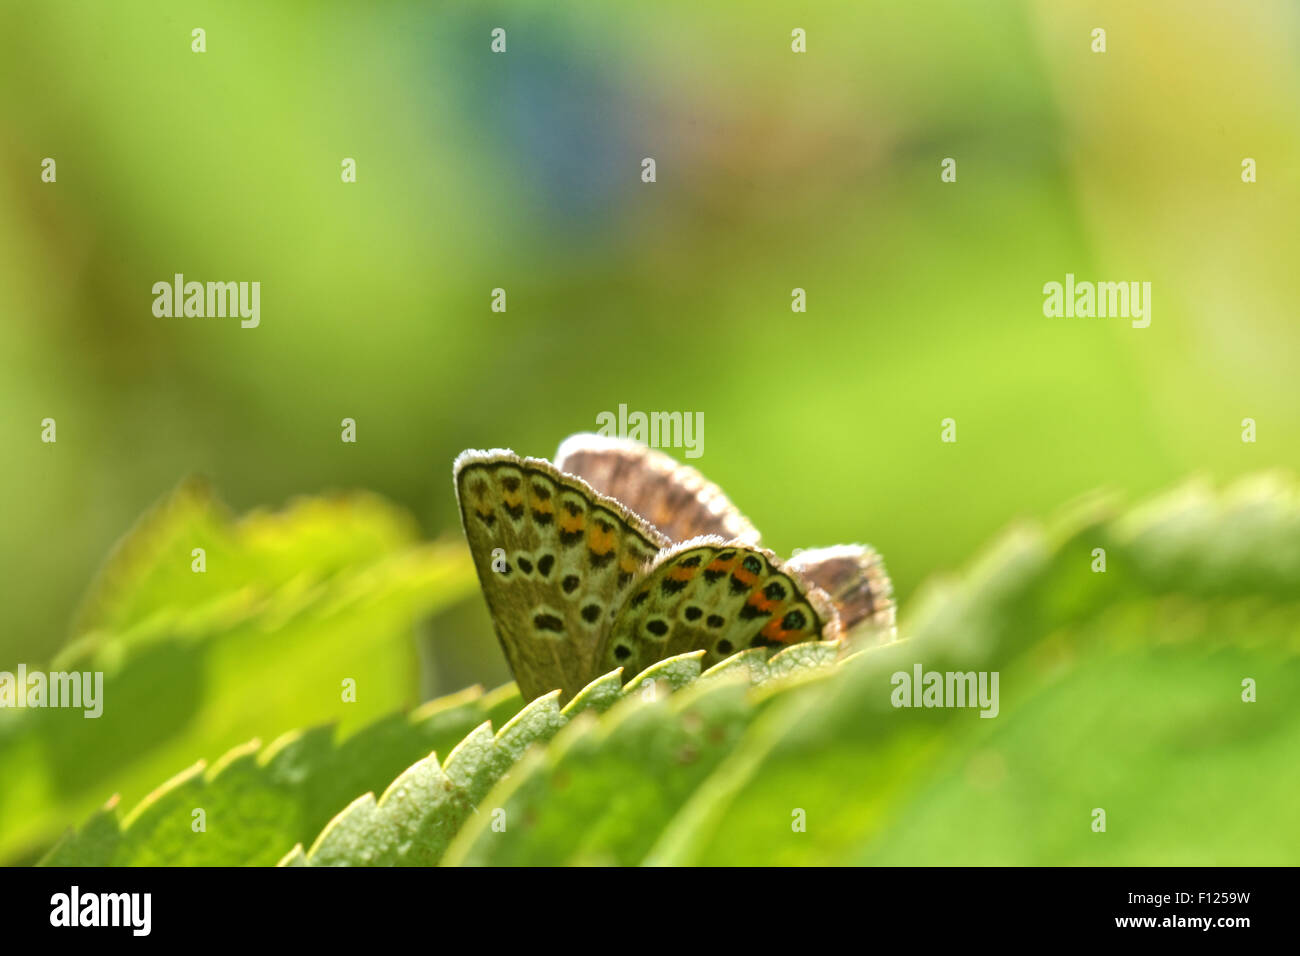 Gossamer-winged butterfly hiding behind green leaves Stock Photo